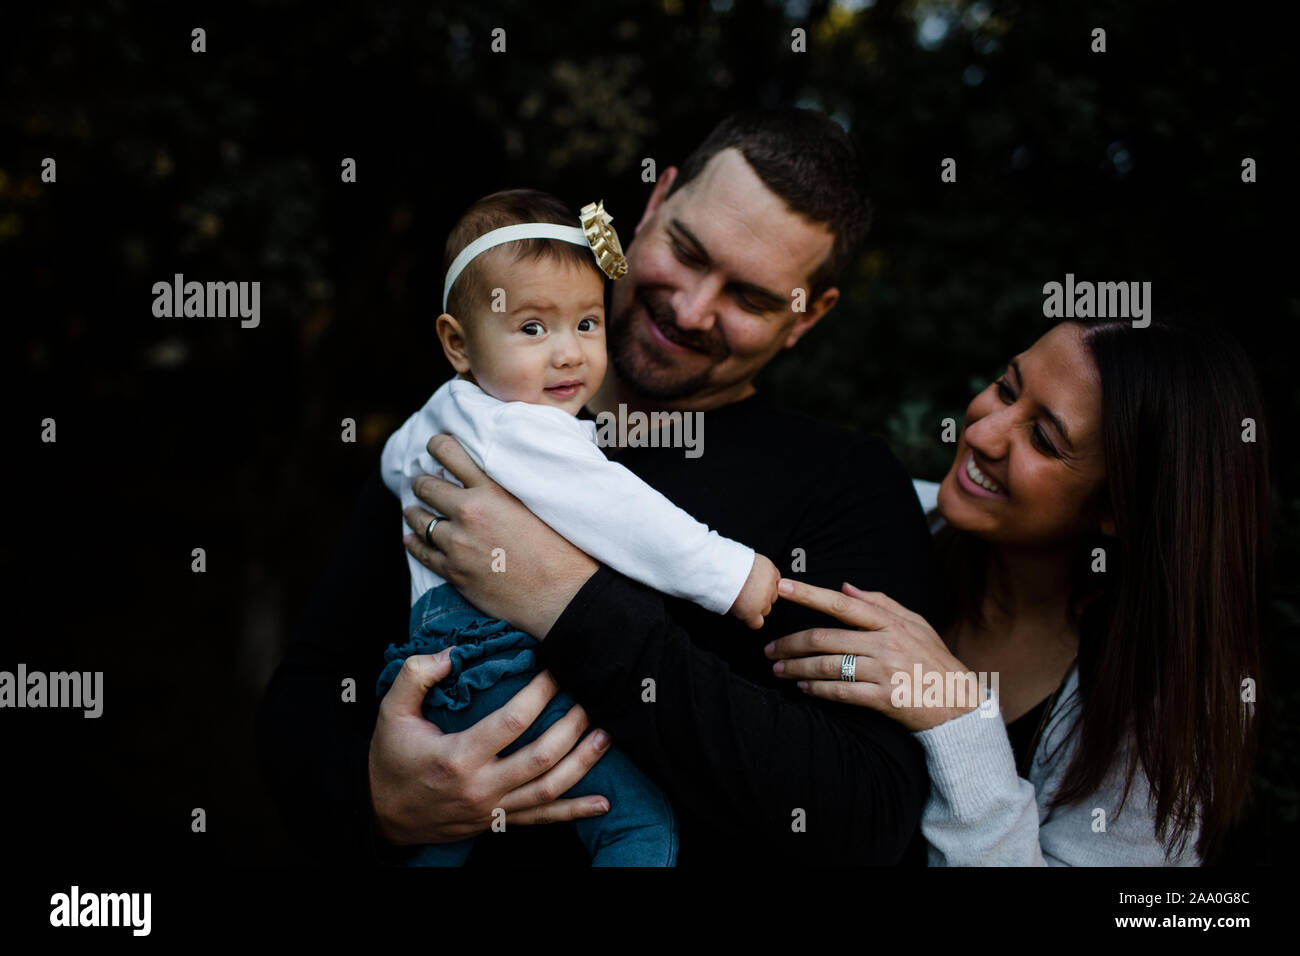 Mom & Dad Smiling at Infant Daughter Stock Photo